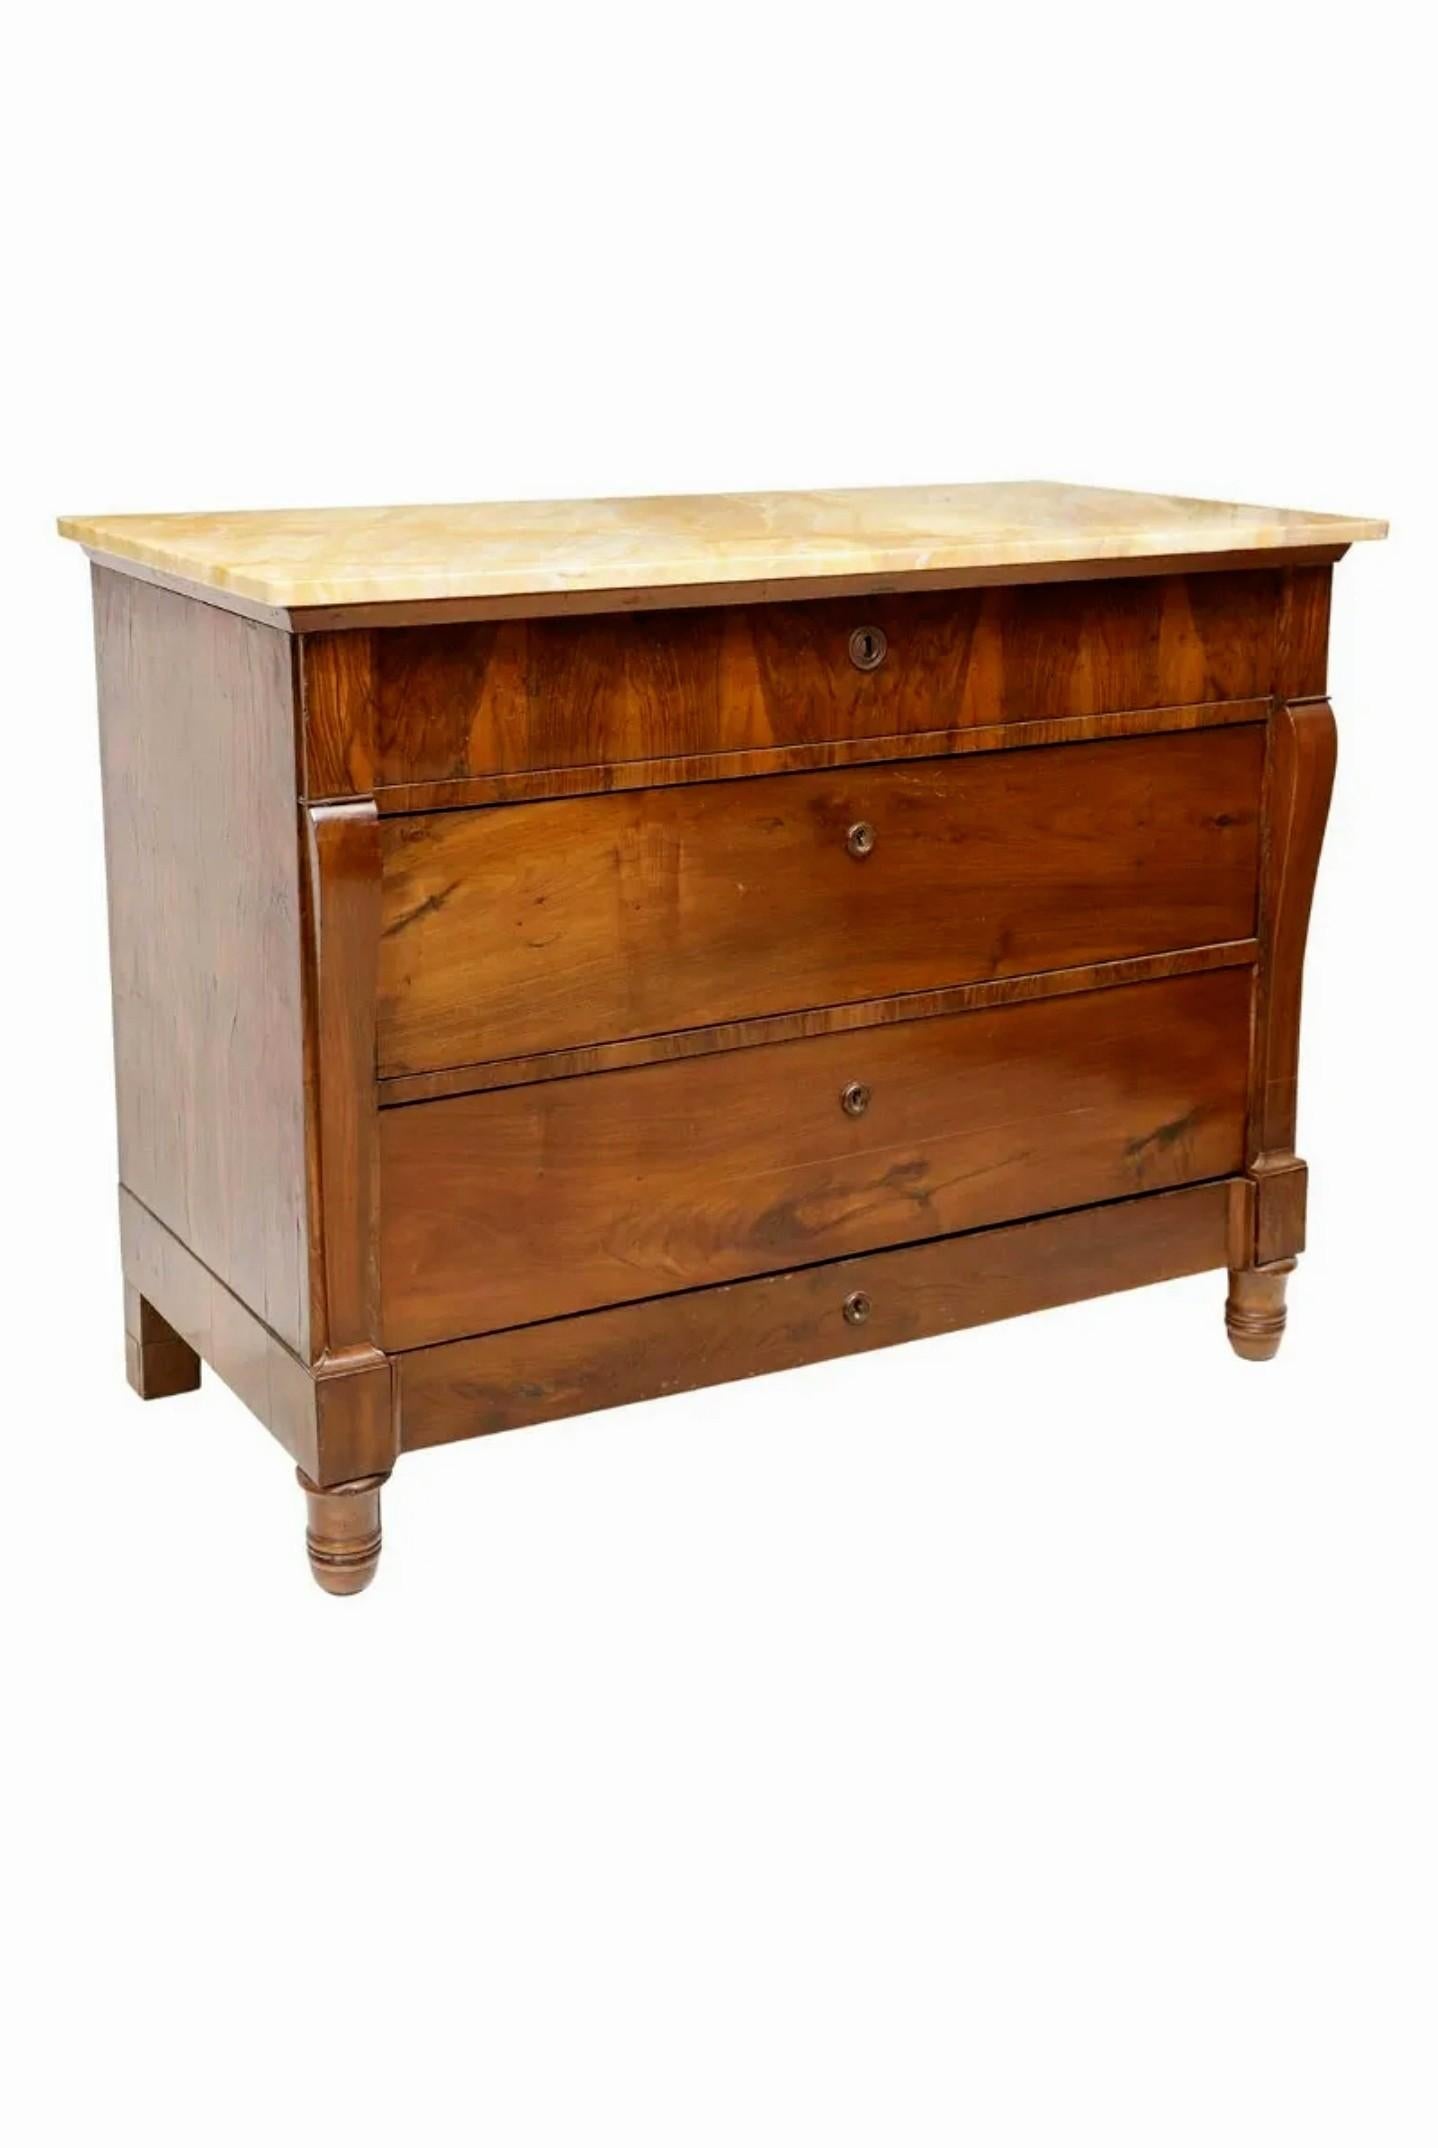 Hand-Crafted Italian 19th Century Marble-Top Figured Walnut Chest of Drawers Commode